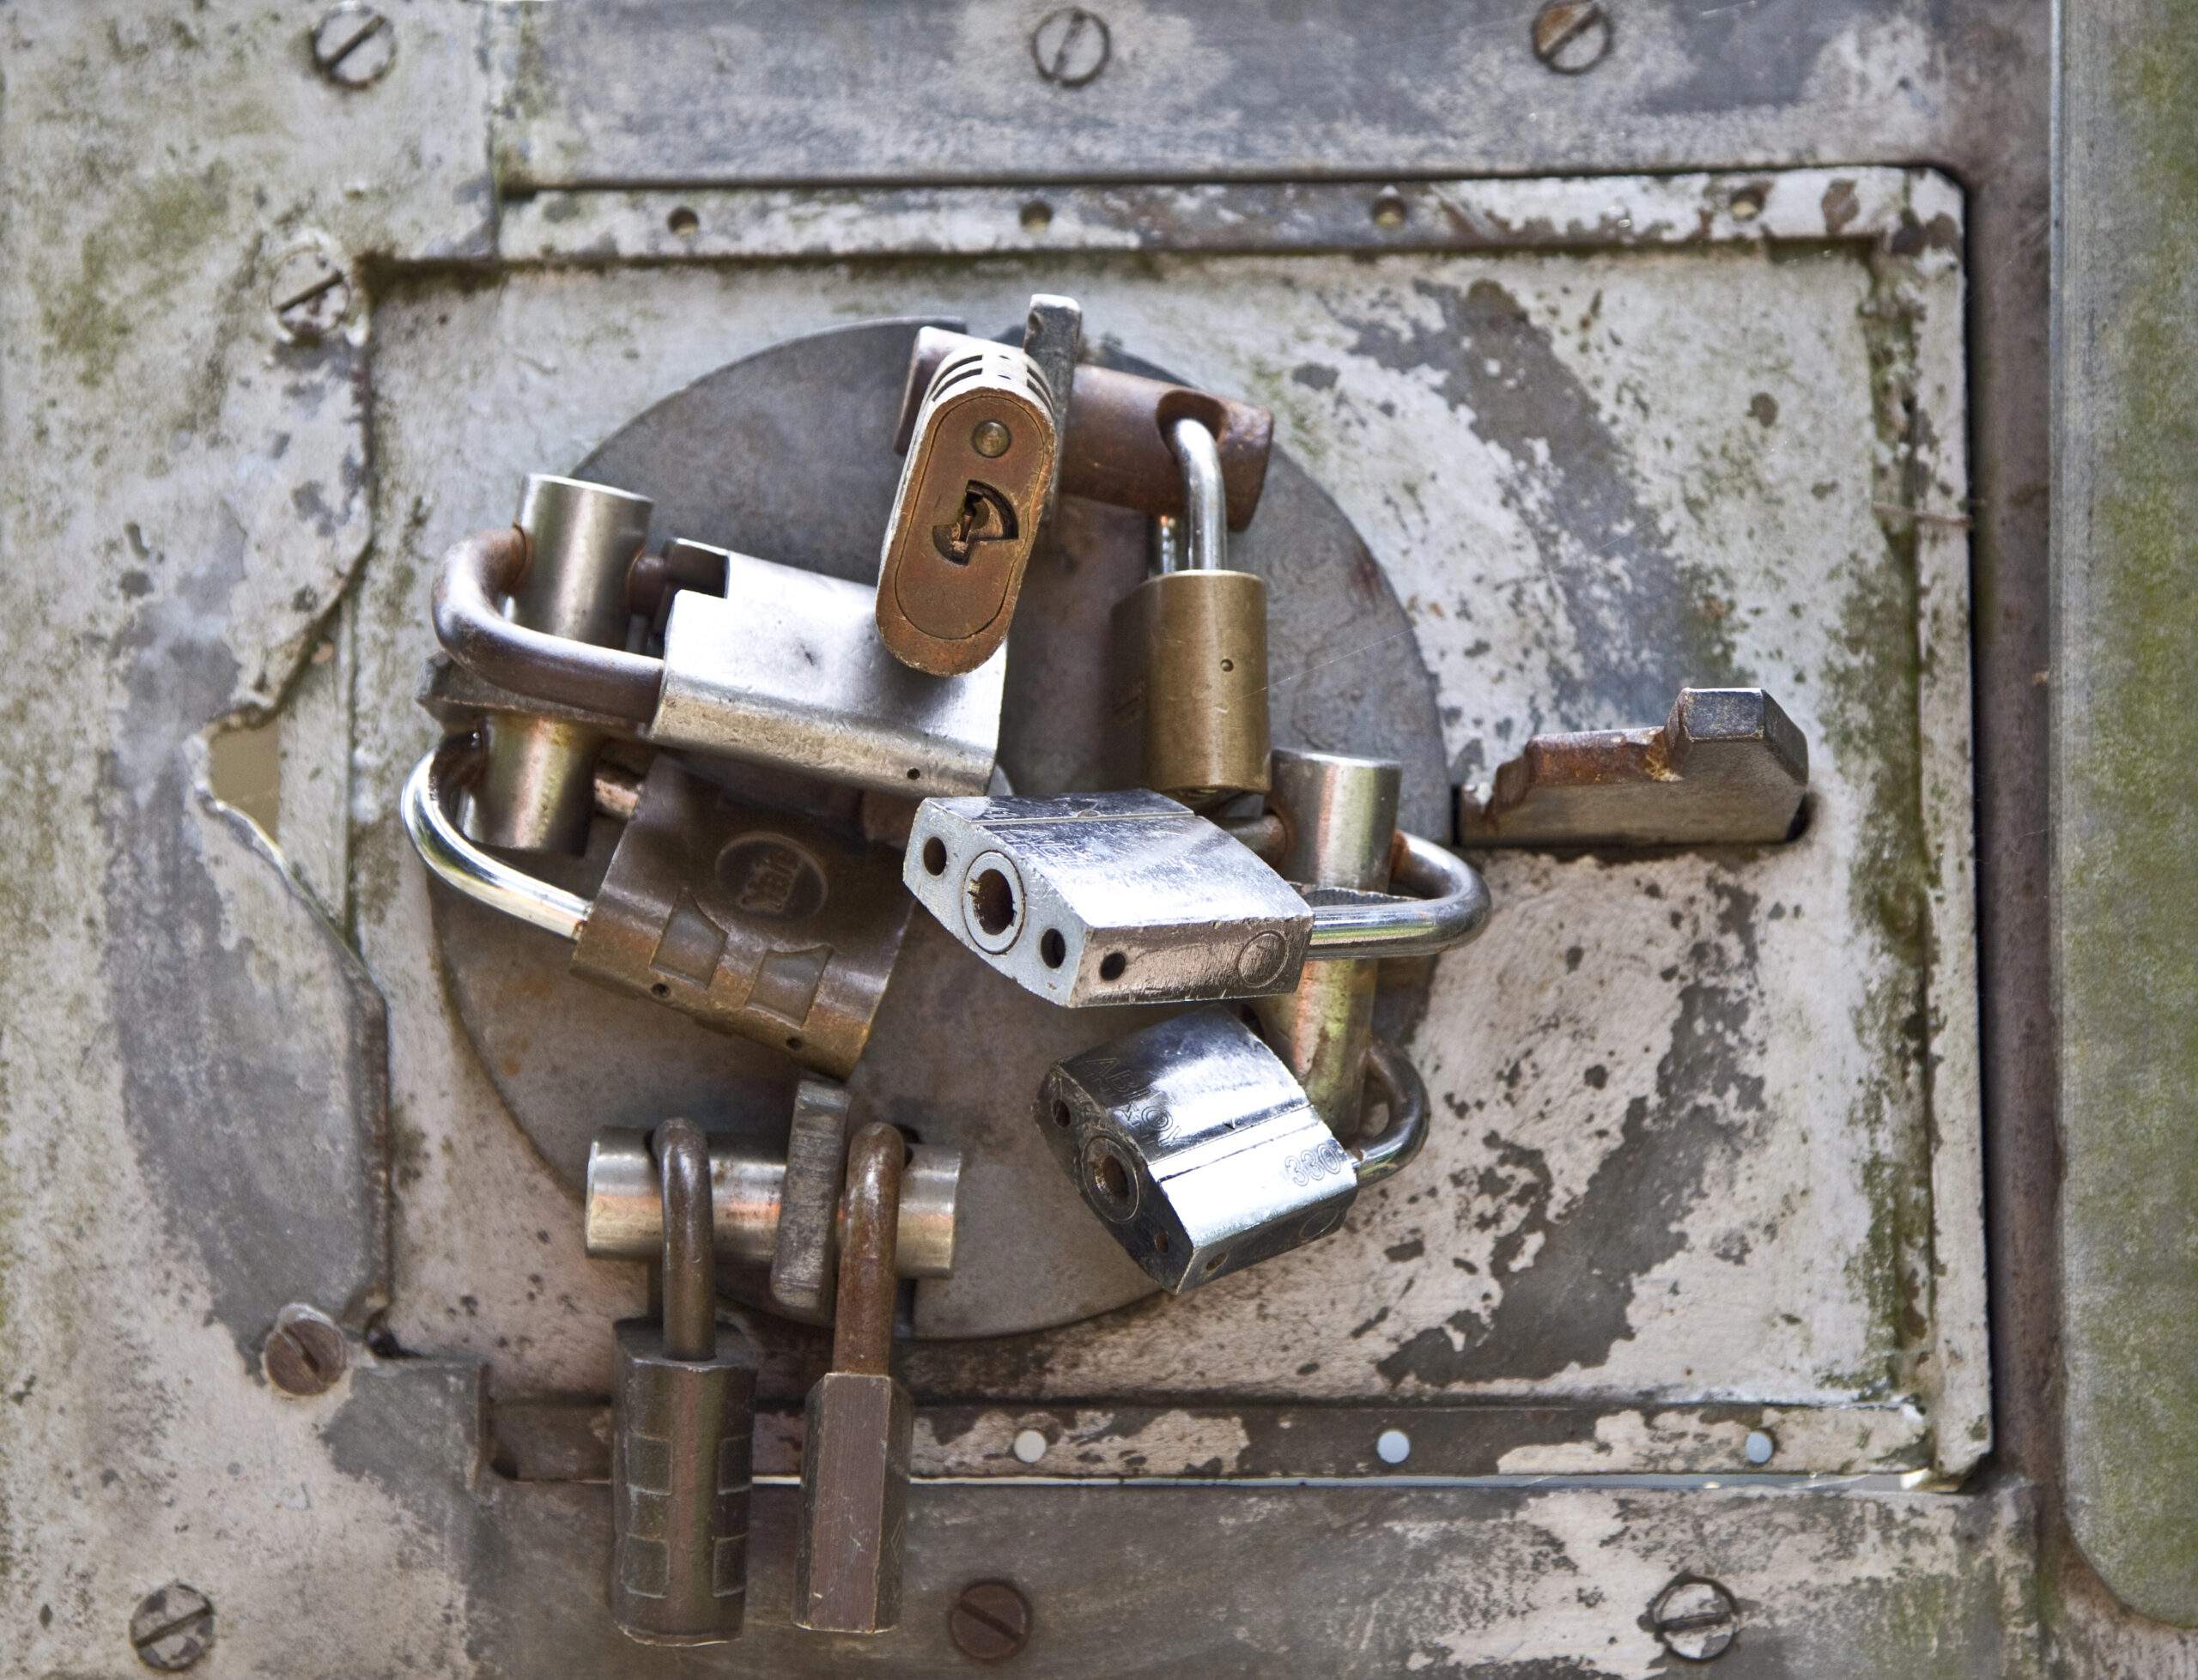 An image of multiple locks demonstrating how much cybersecurity is required these days